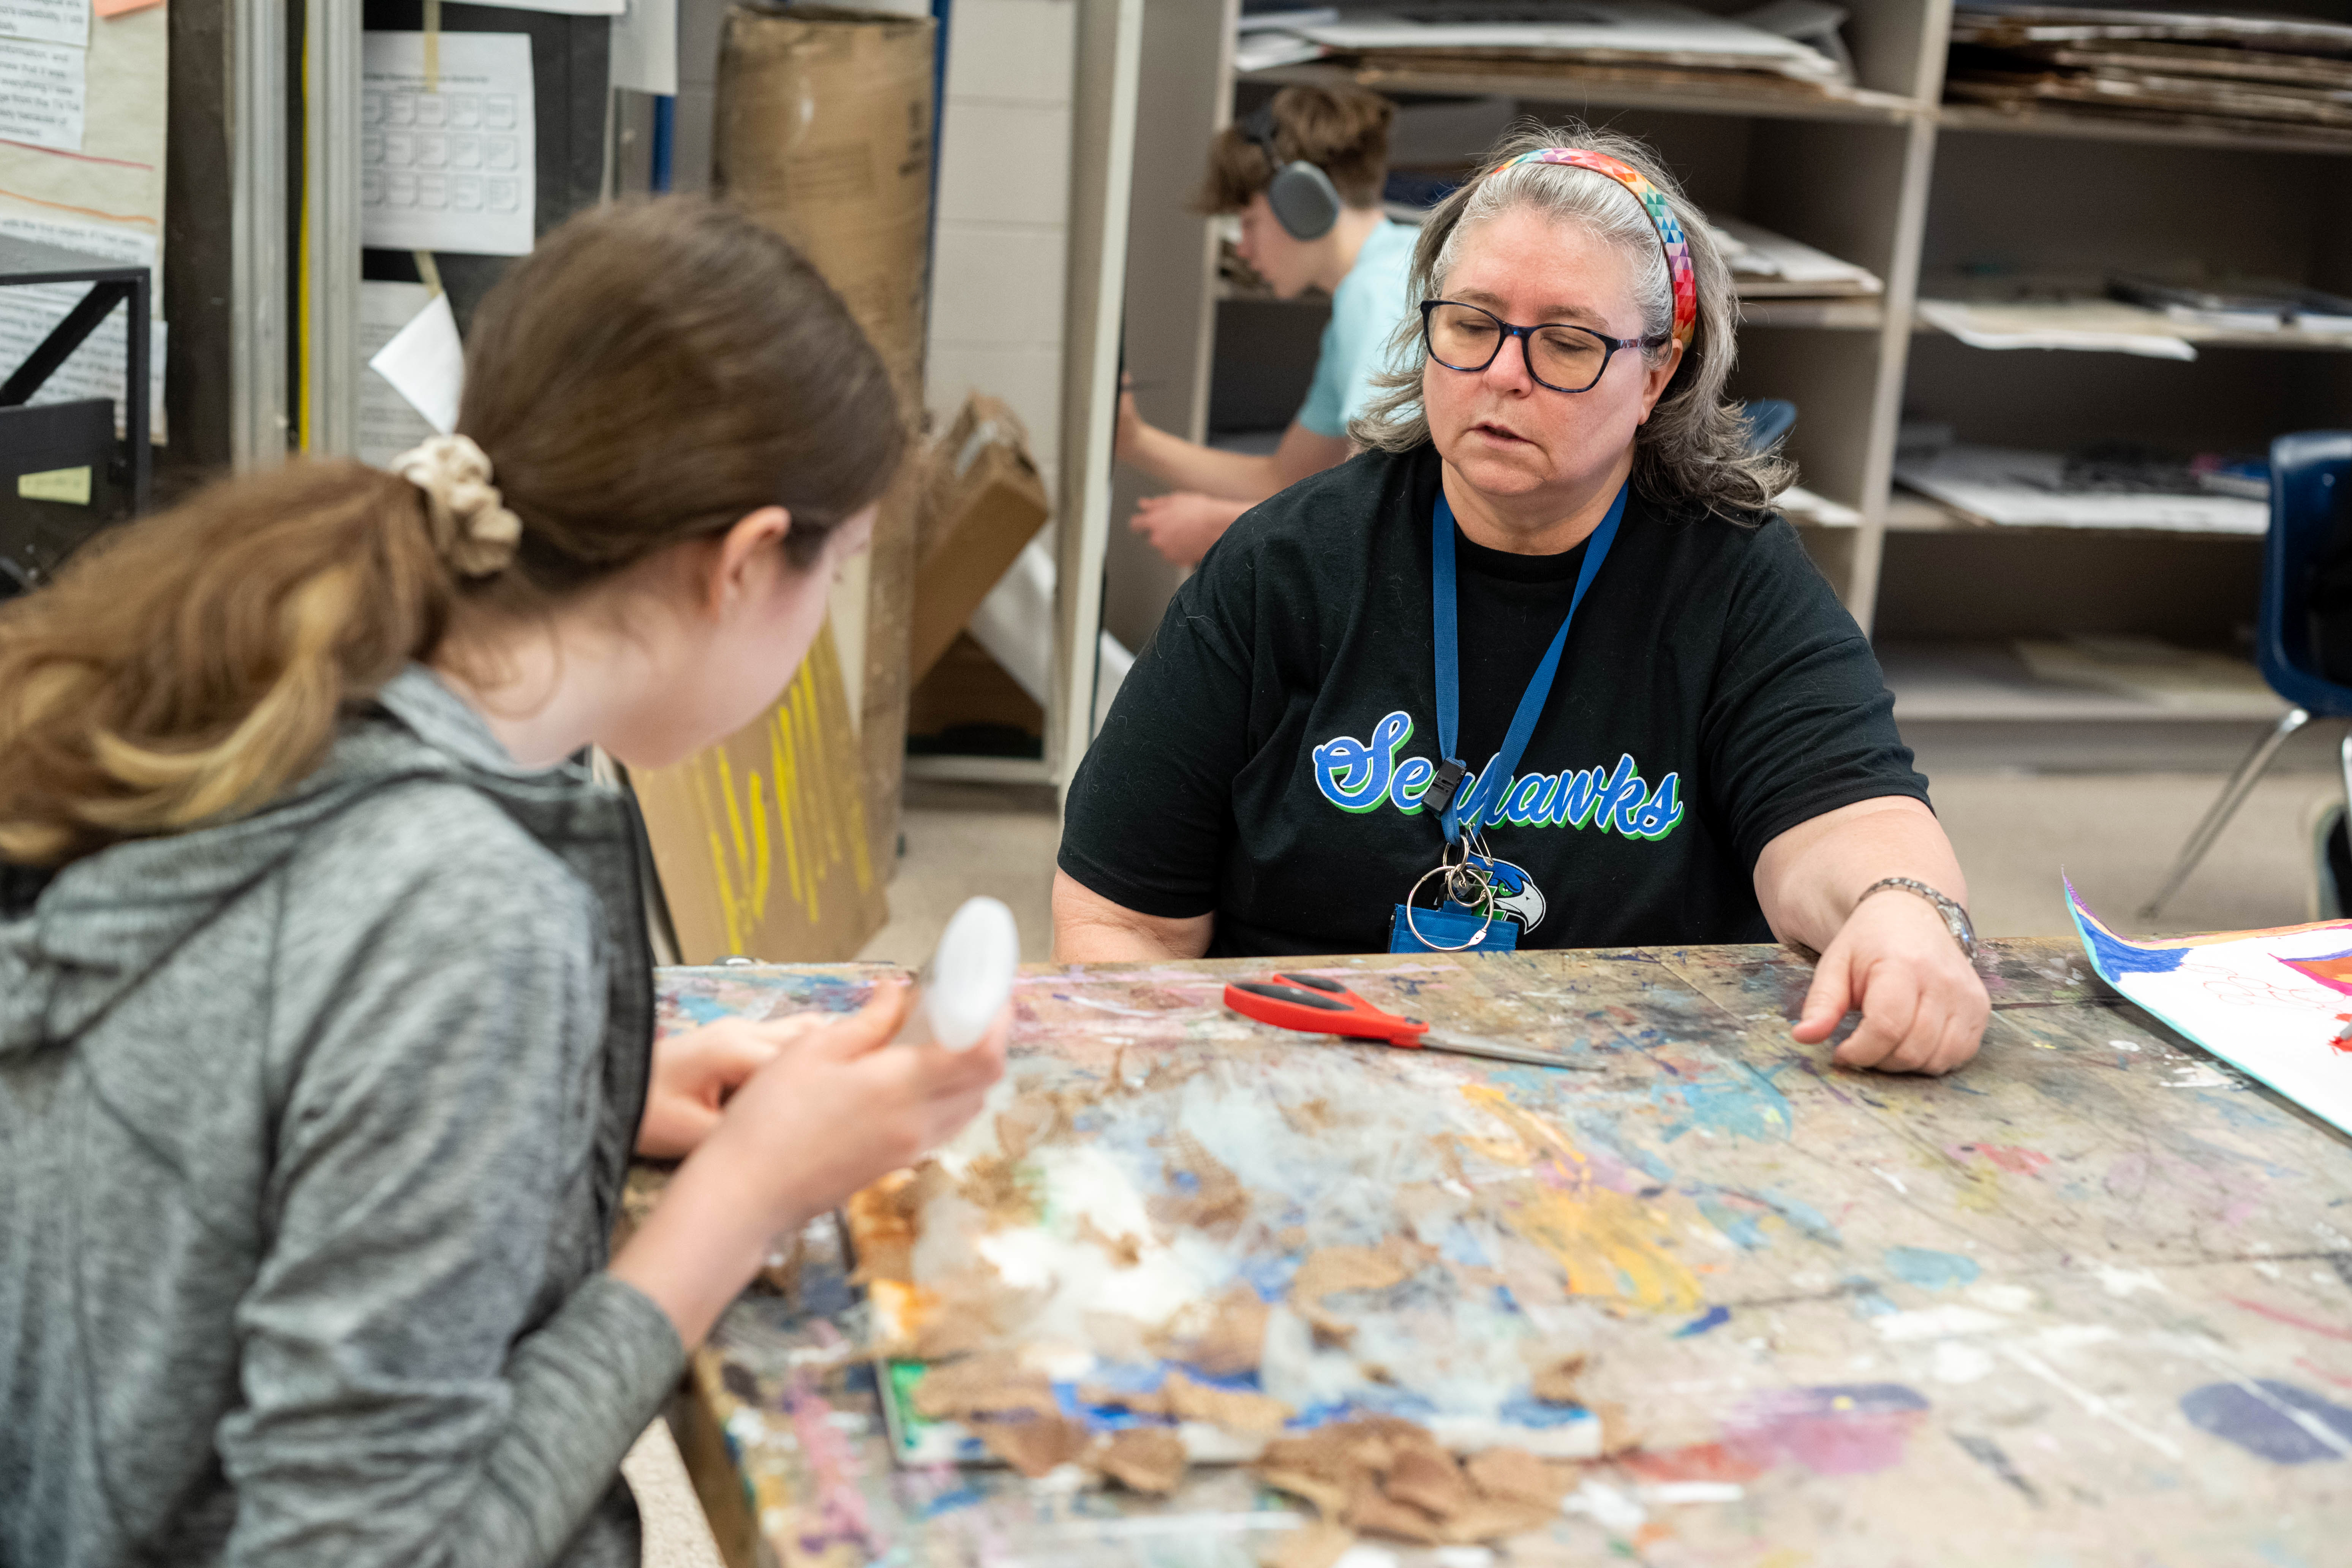 Co-teacher Claudia Harvey helps student Nora Patterson with her project - a series of fabrics glued onto canvas.